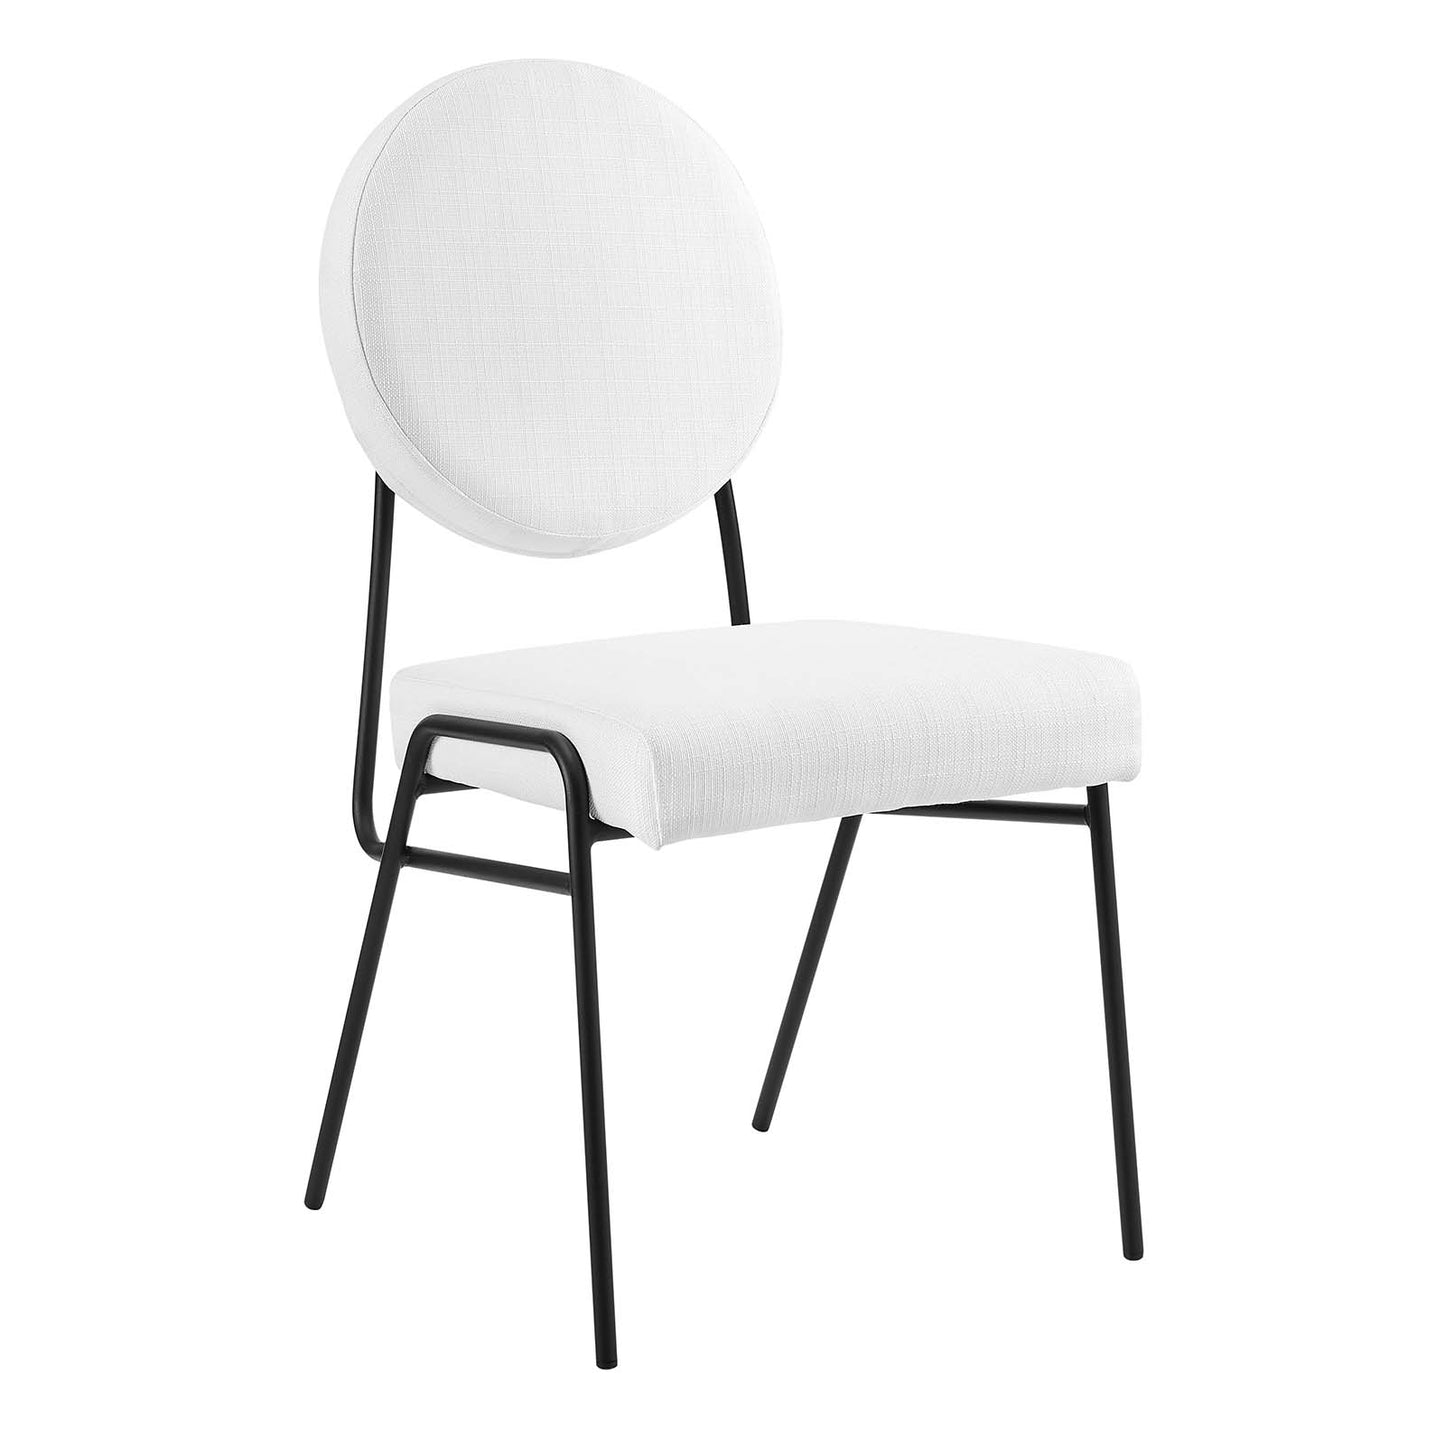 Craft Upholstered Fabric Dining Side Chairs - Set of 2 Black White EEI-6582-BLK-WHI